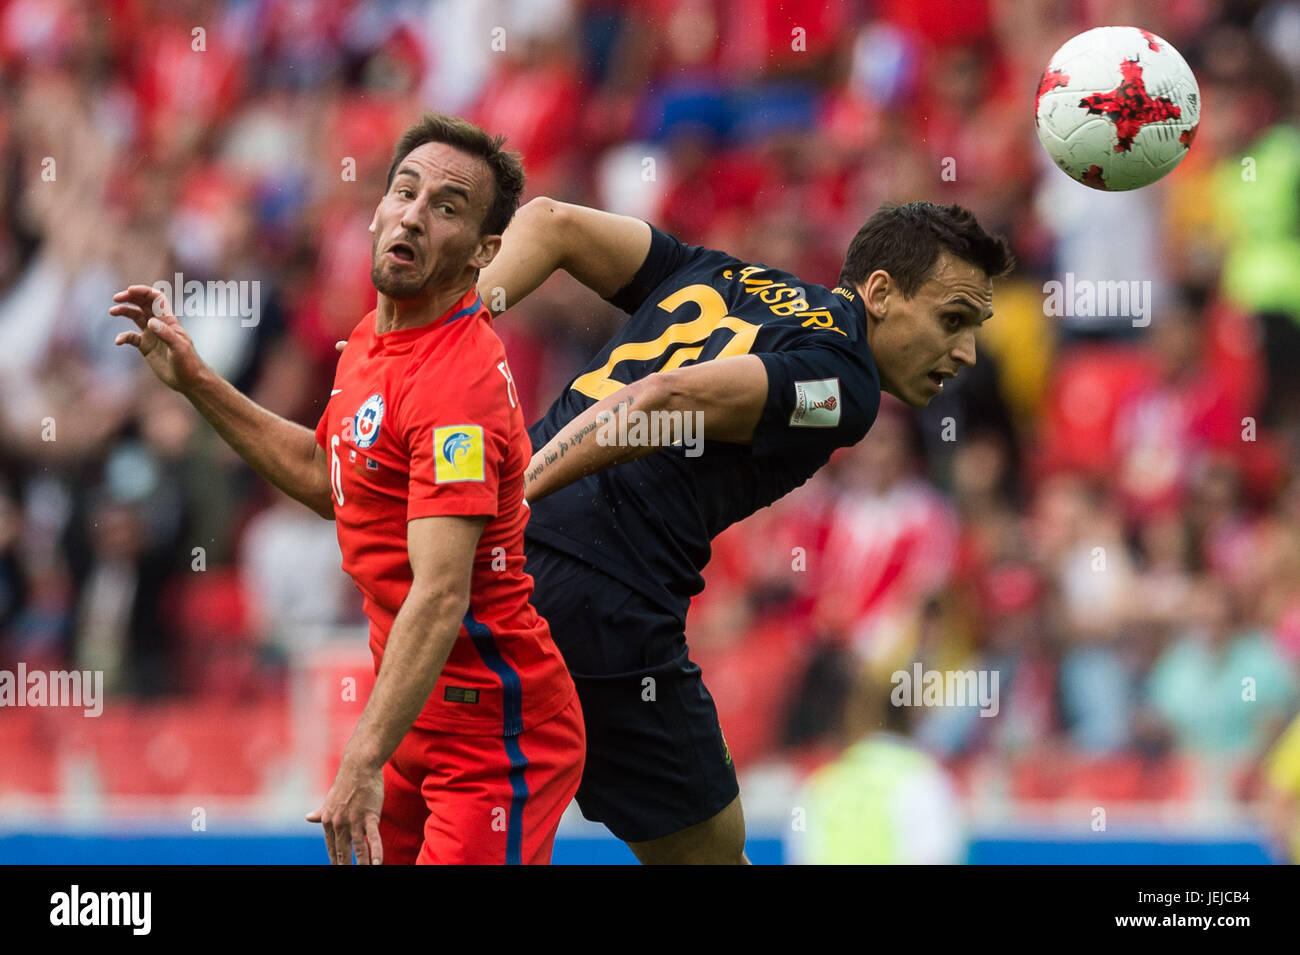 Moscow, Russia. 25th June, 2017. Jose Fuenzalida (L) of Chile vies for the ball with Trent Sainsbury of Australia during the FIFA Confederations Cup 2017 football match in Moscow, Russia, June 25, 2017. Match ended 1-1. Credit: Evgeny Sinitsyn/Xinhua/Alamy Live News Stock Photo